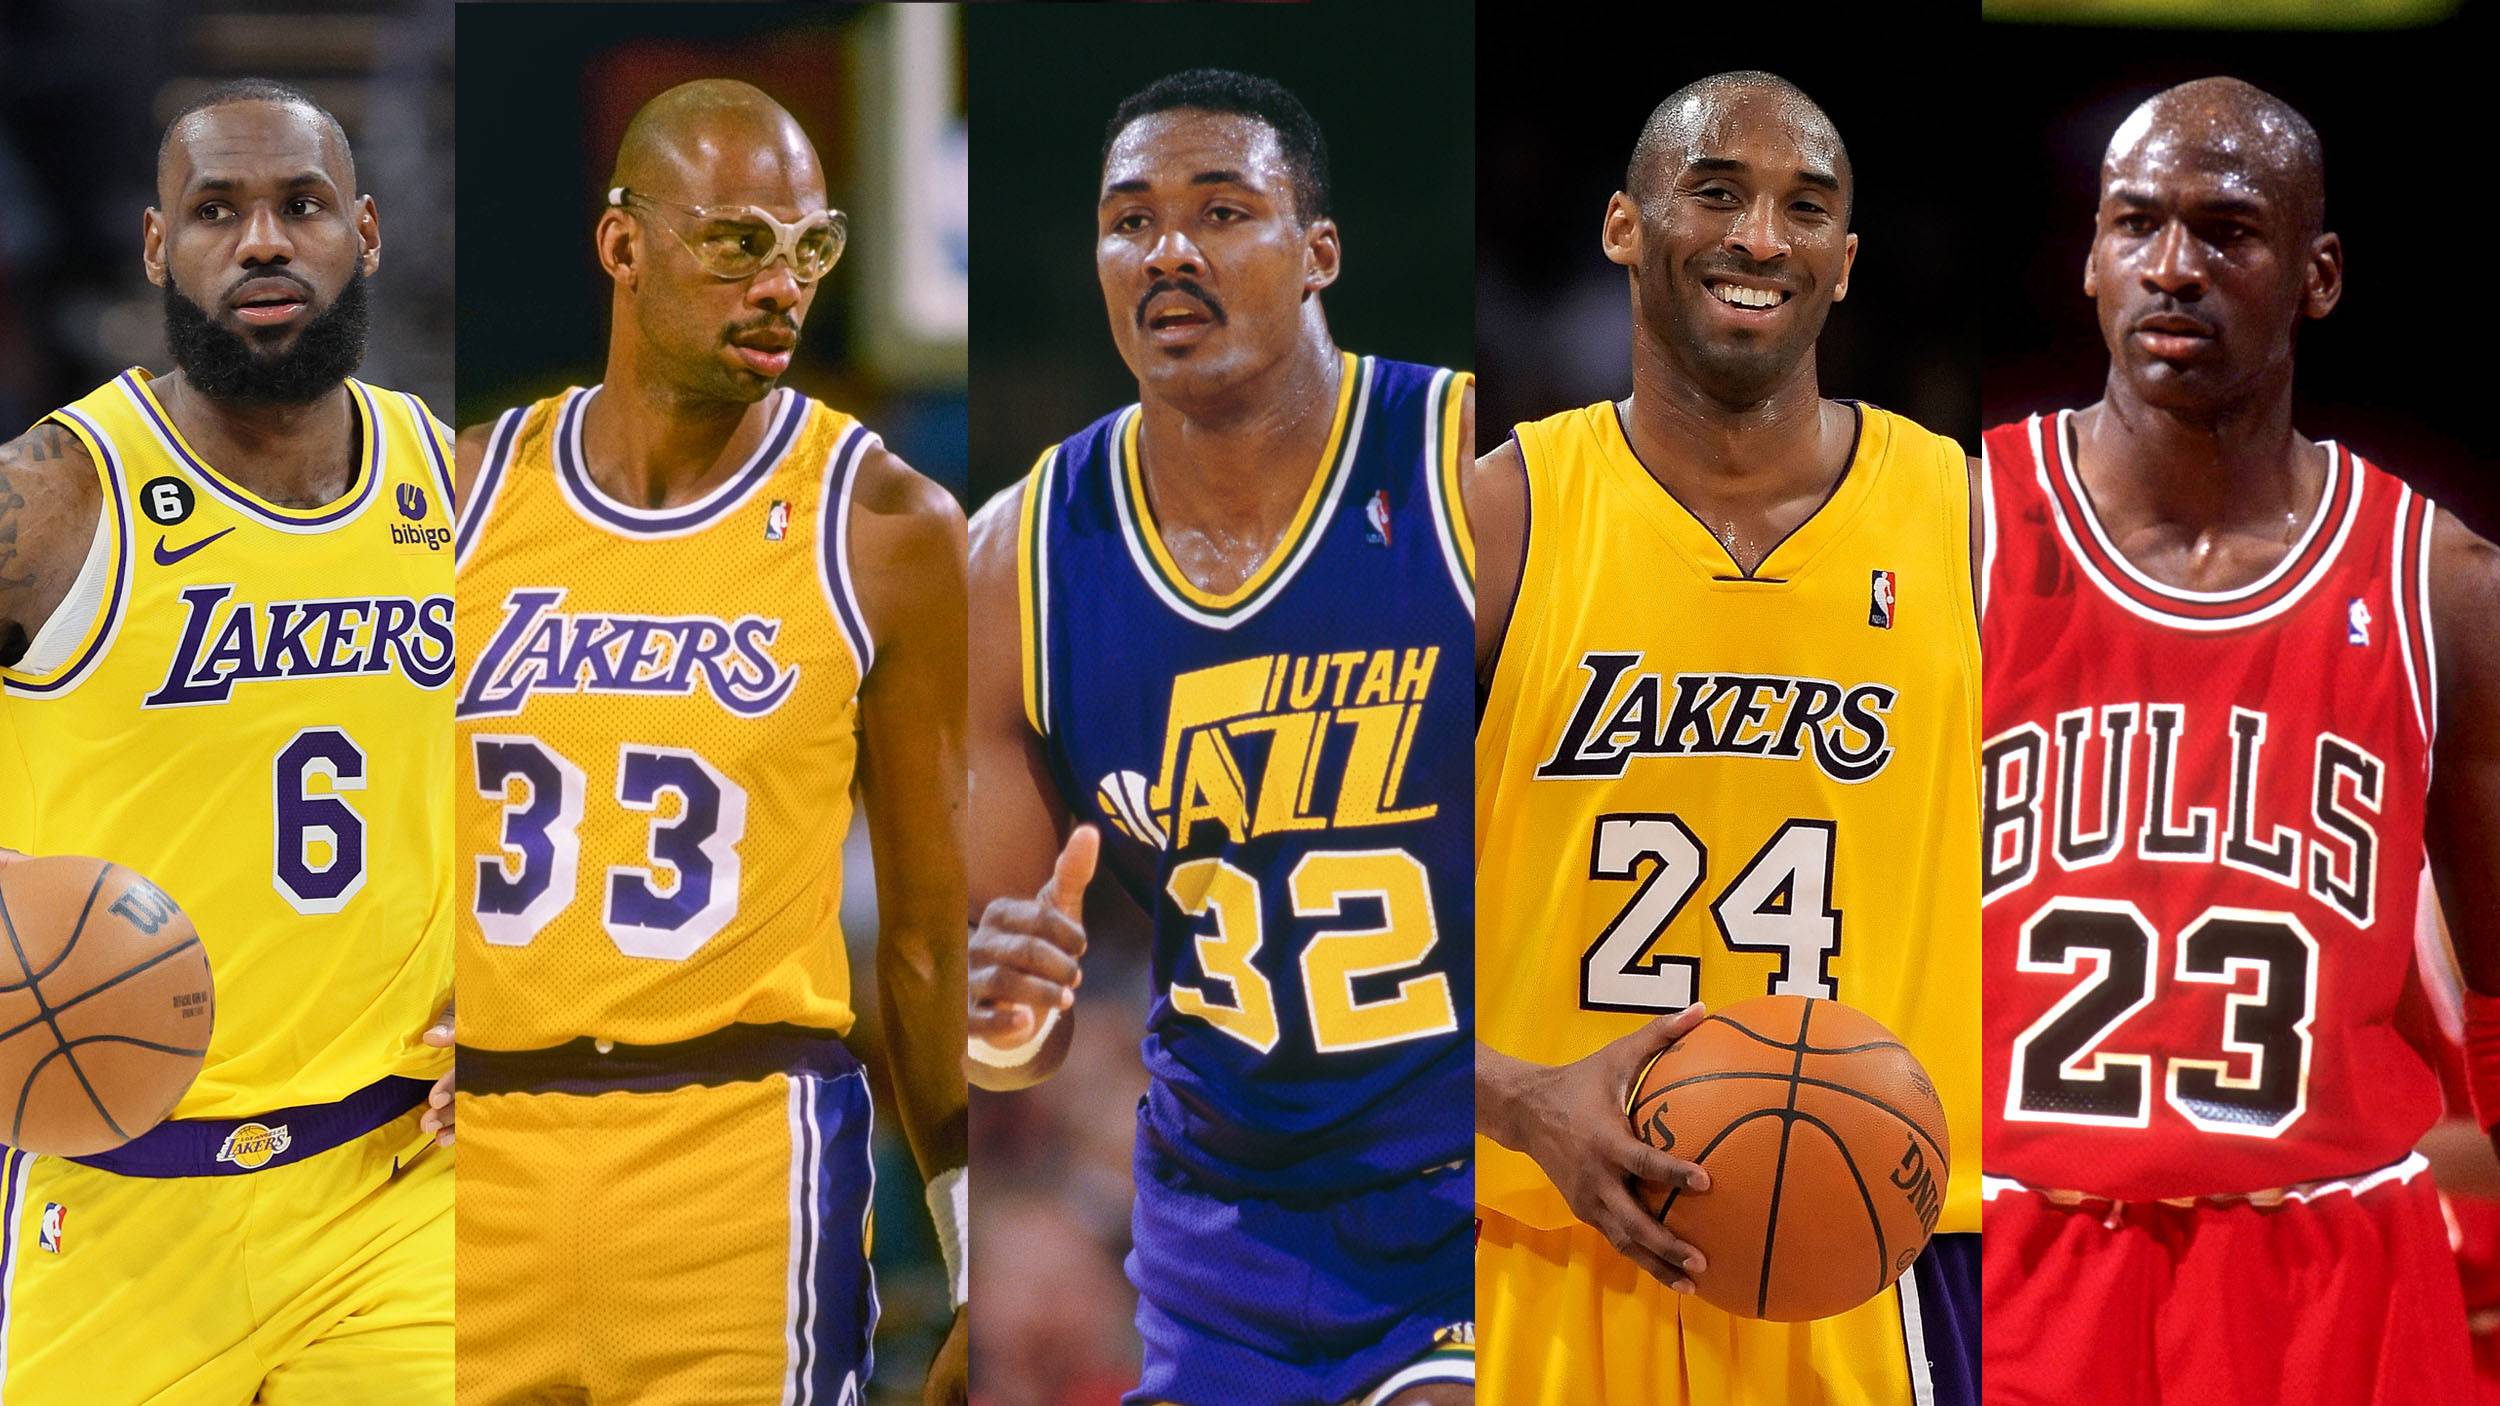 The 5 Best Utah Jazz teams of All-Time according to